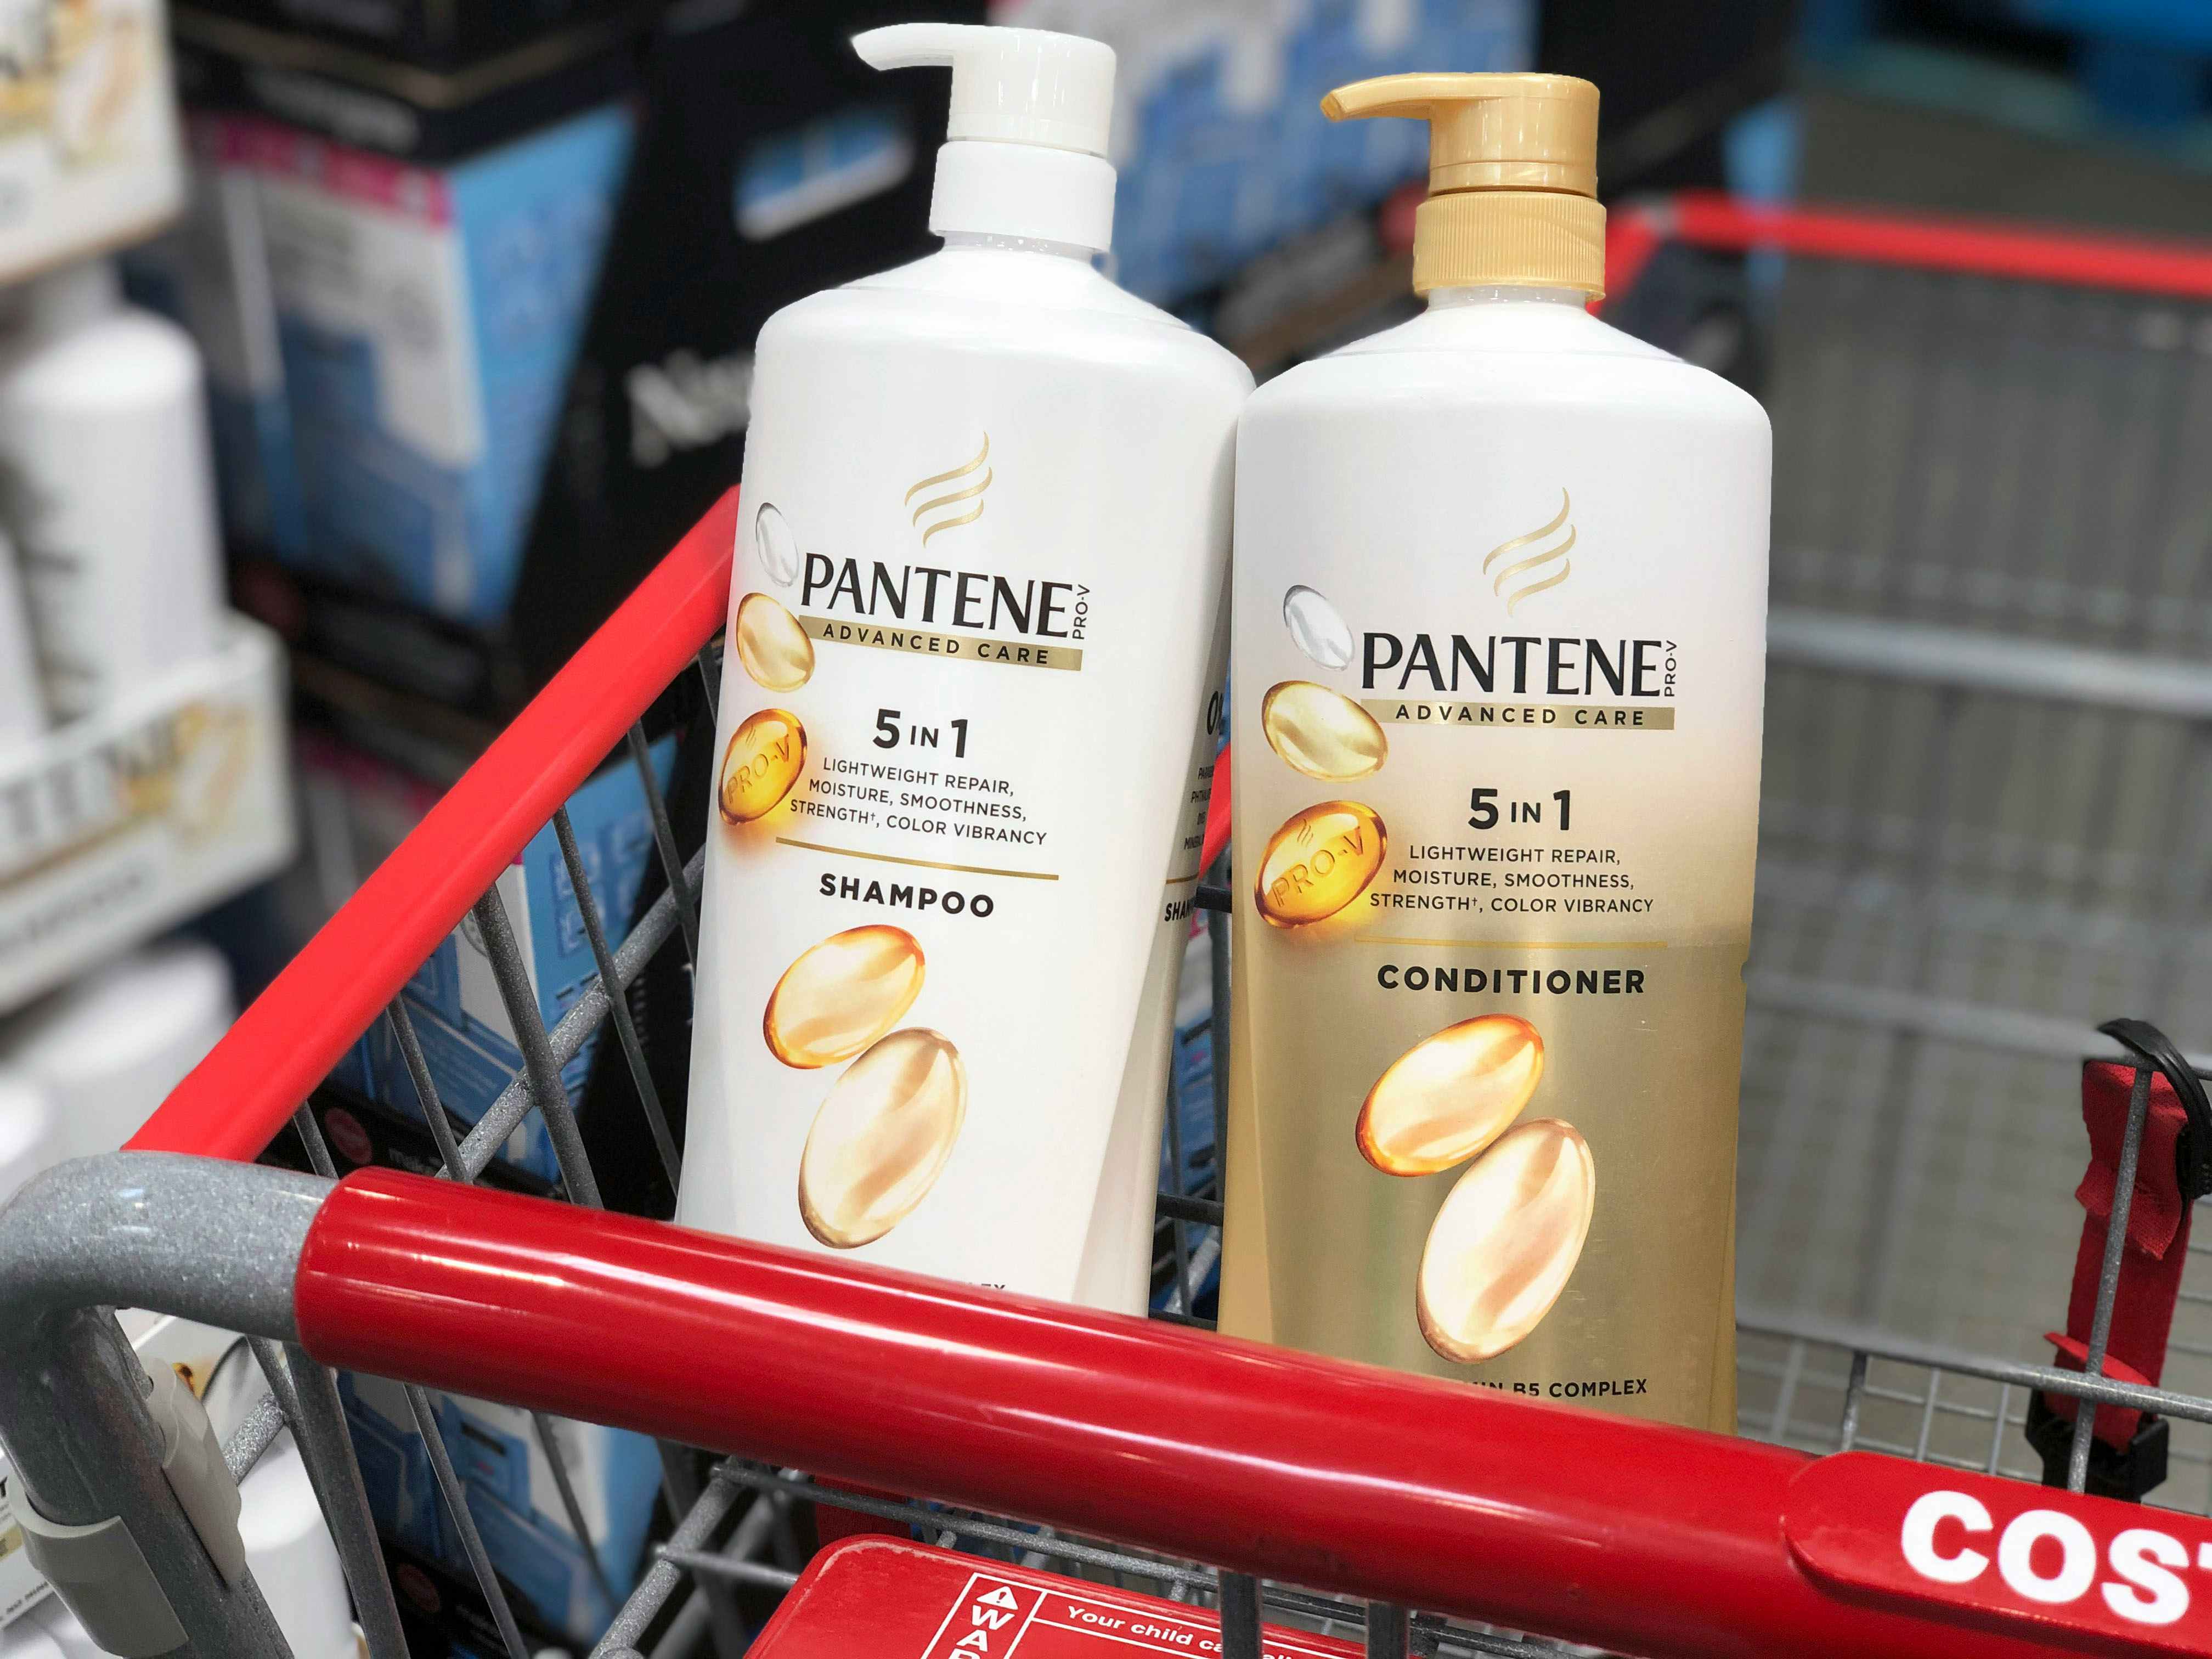 pantene advanced care shampoo and conditioner in a cart